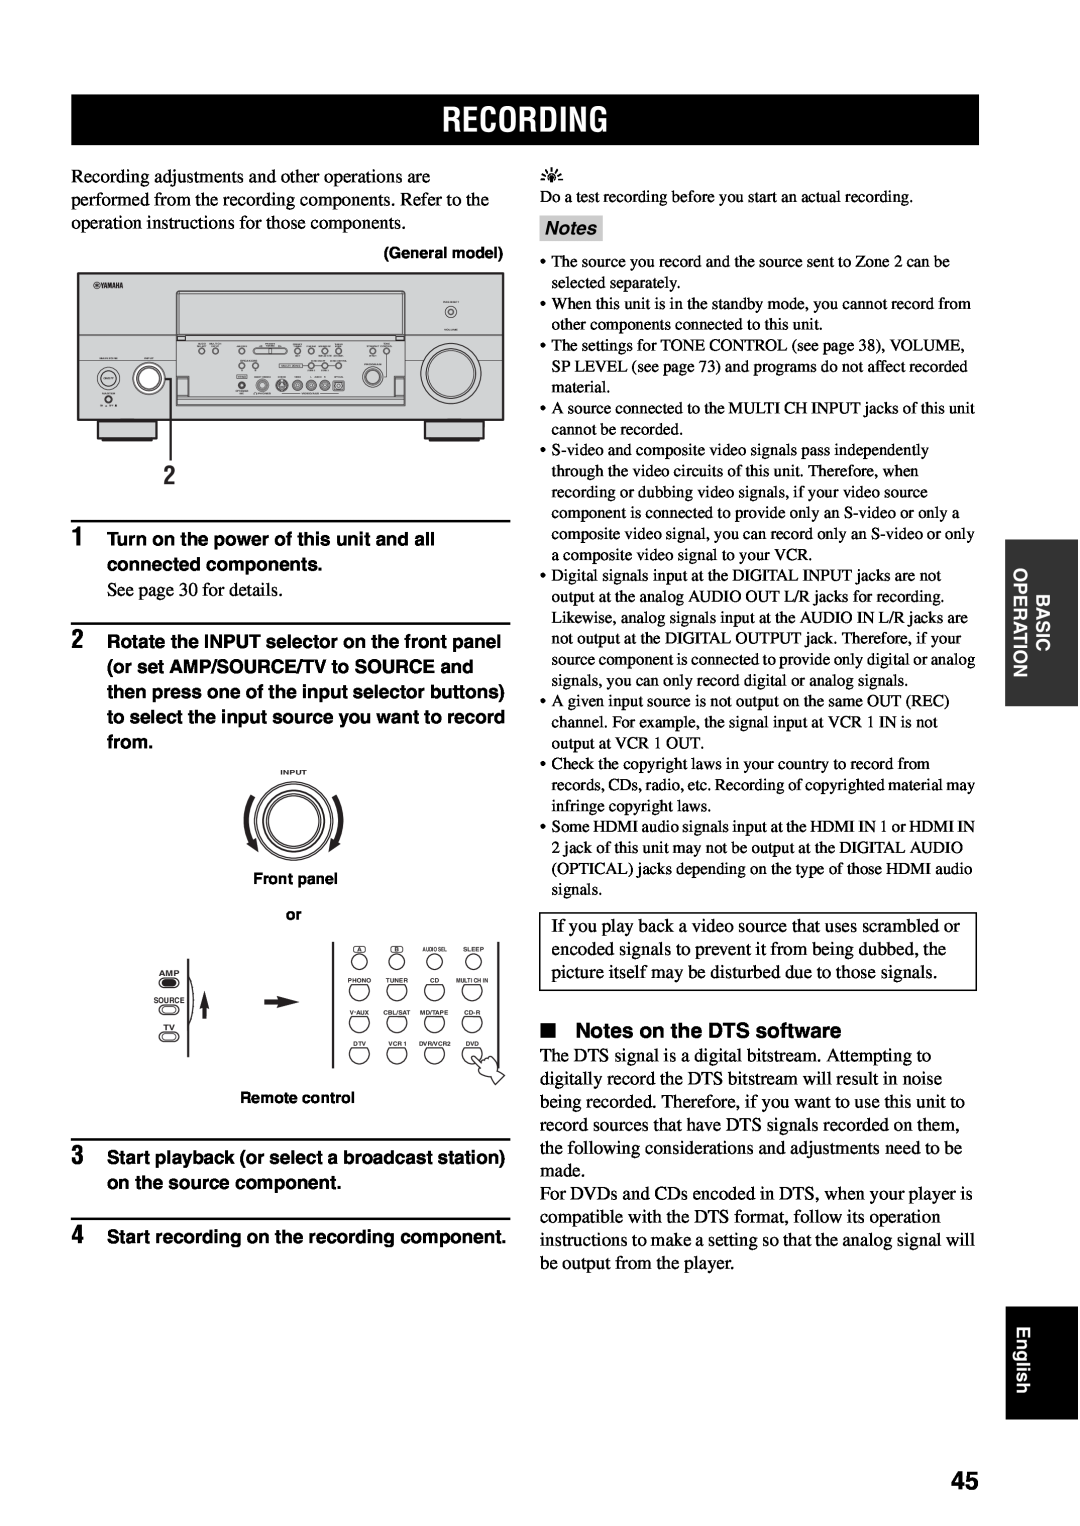 Yamaha RX-V1600 owner manual Recording, Notes on the DTS software 